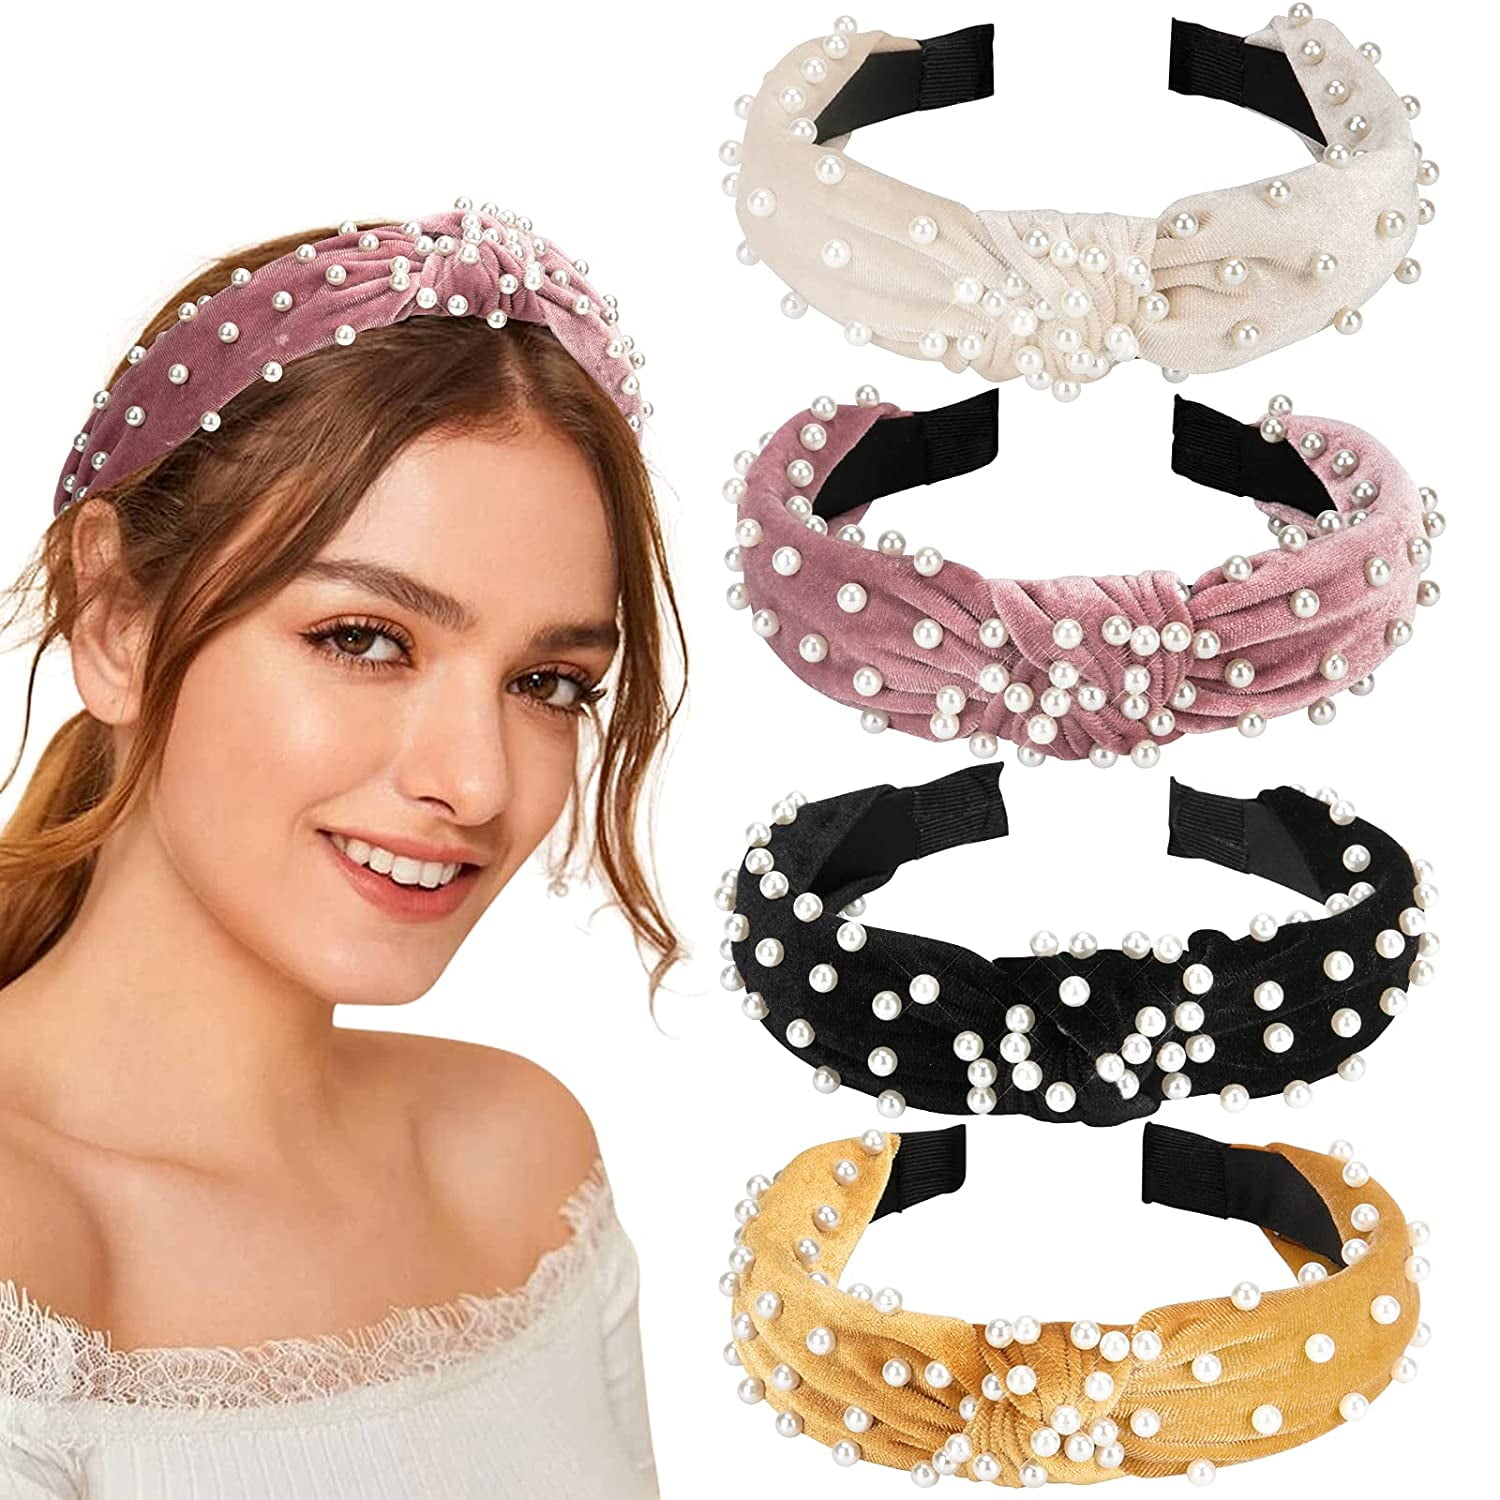 Ribbon Hair Scrunchies Printed Satin Silk Hair Scarves Striped Long  Headband Plaid Hair Loop Bow Scrunchie Ponytail Holders Vintage Head Tie  for Women and Girls (Pack of 6) (Style F) 